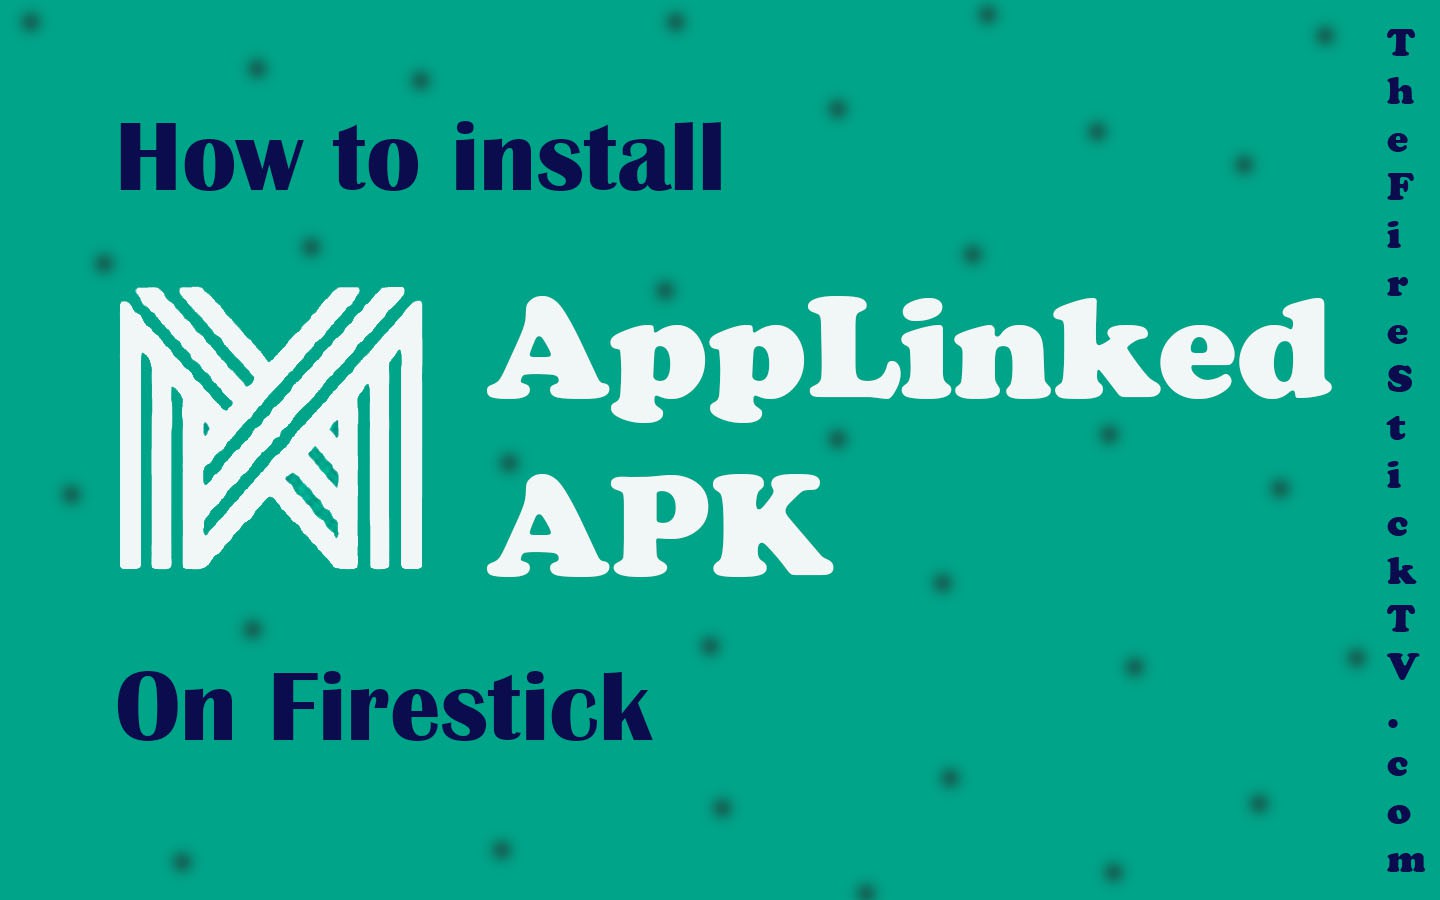 How to Install AppLinked APK on FireStick in Easy Steps 2021